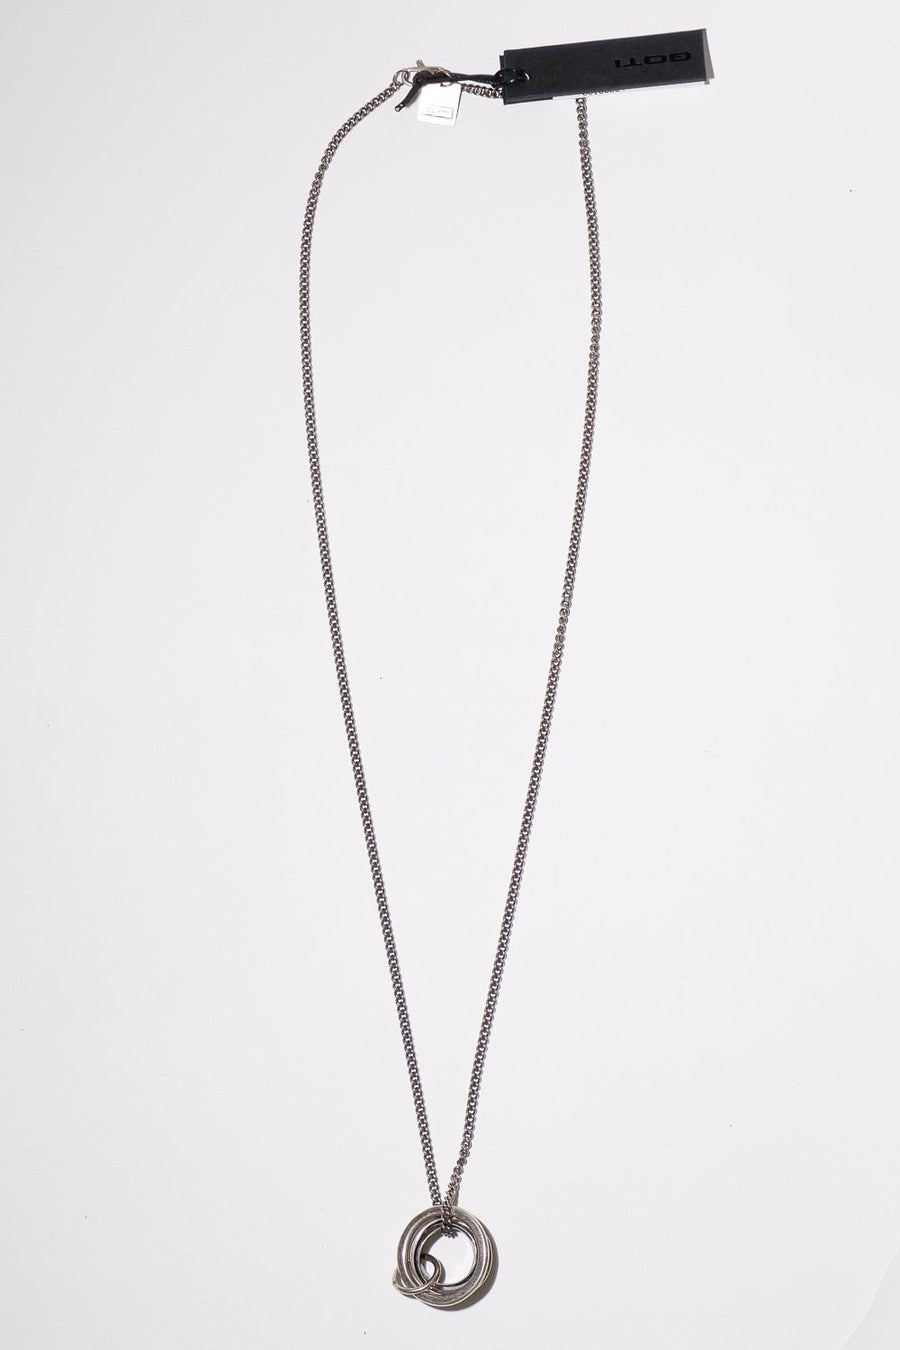 Buy the GOTI Necklace AG CN569 Silver at Intro. Spend £50 for free UK delivery. Official stockists. We ship worldwide.